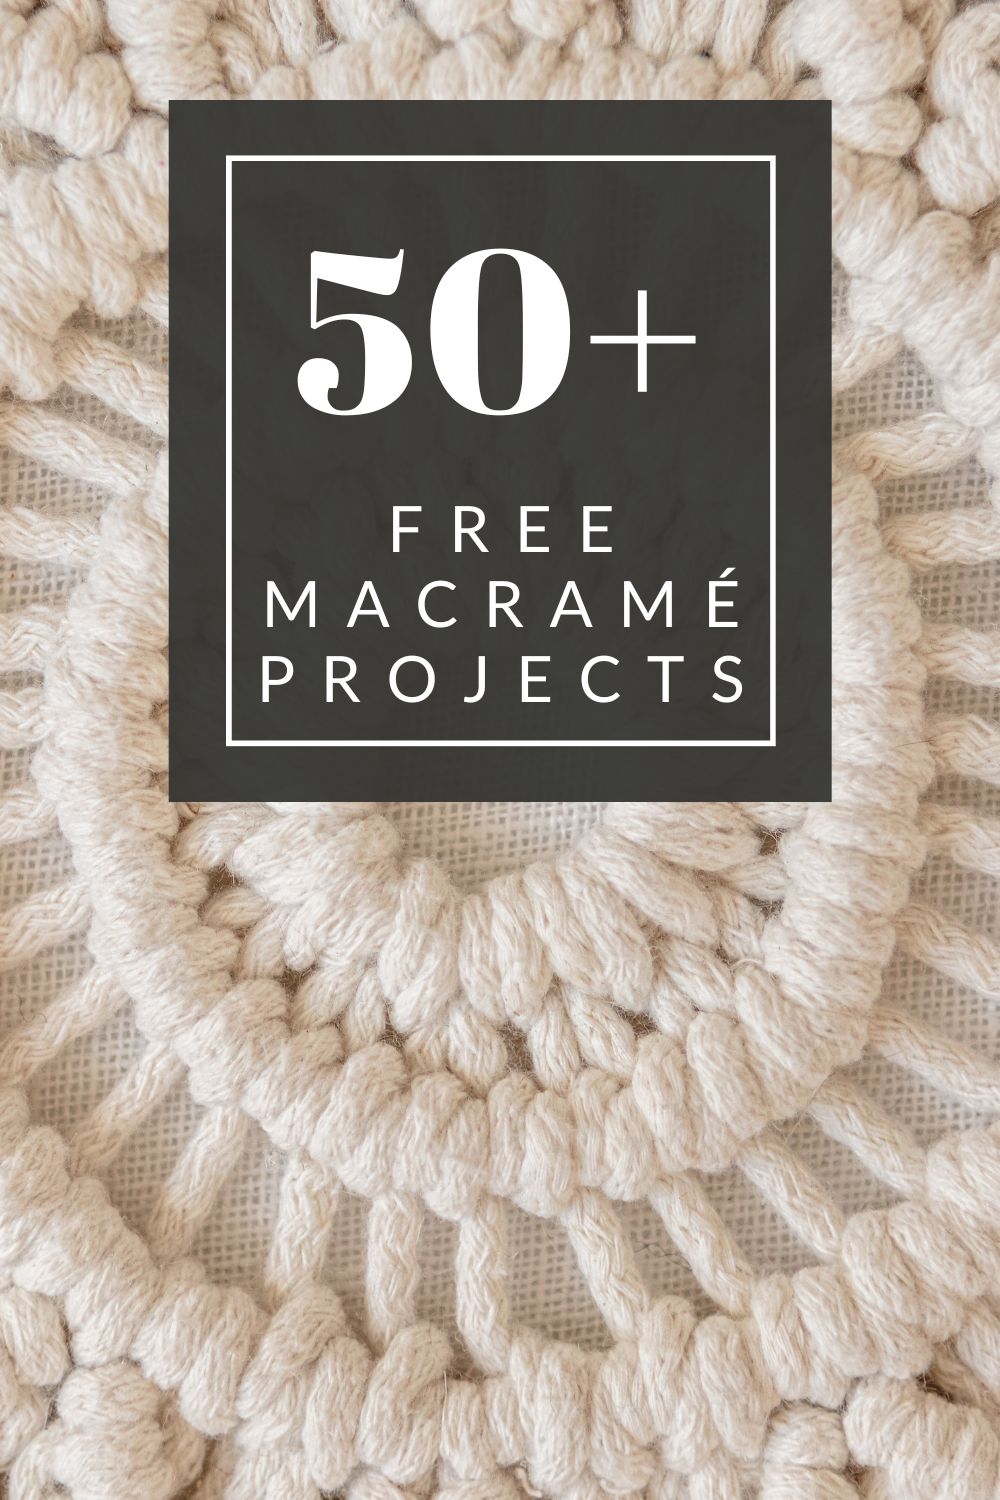 Over 50 Completely Free Macrame Projects